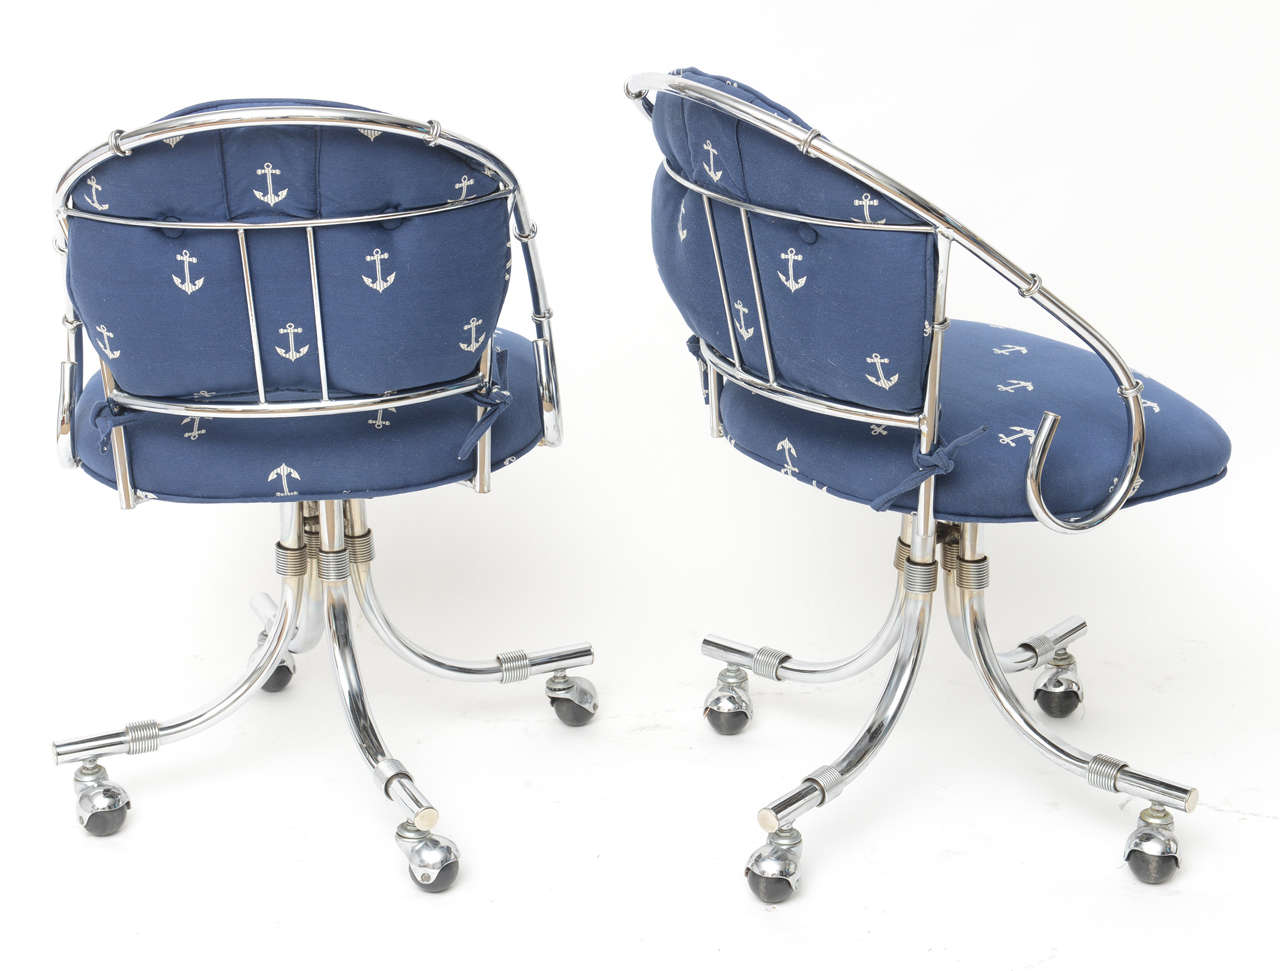 Four Chrome Swivel Chairs in Nautical Upholstery  1